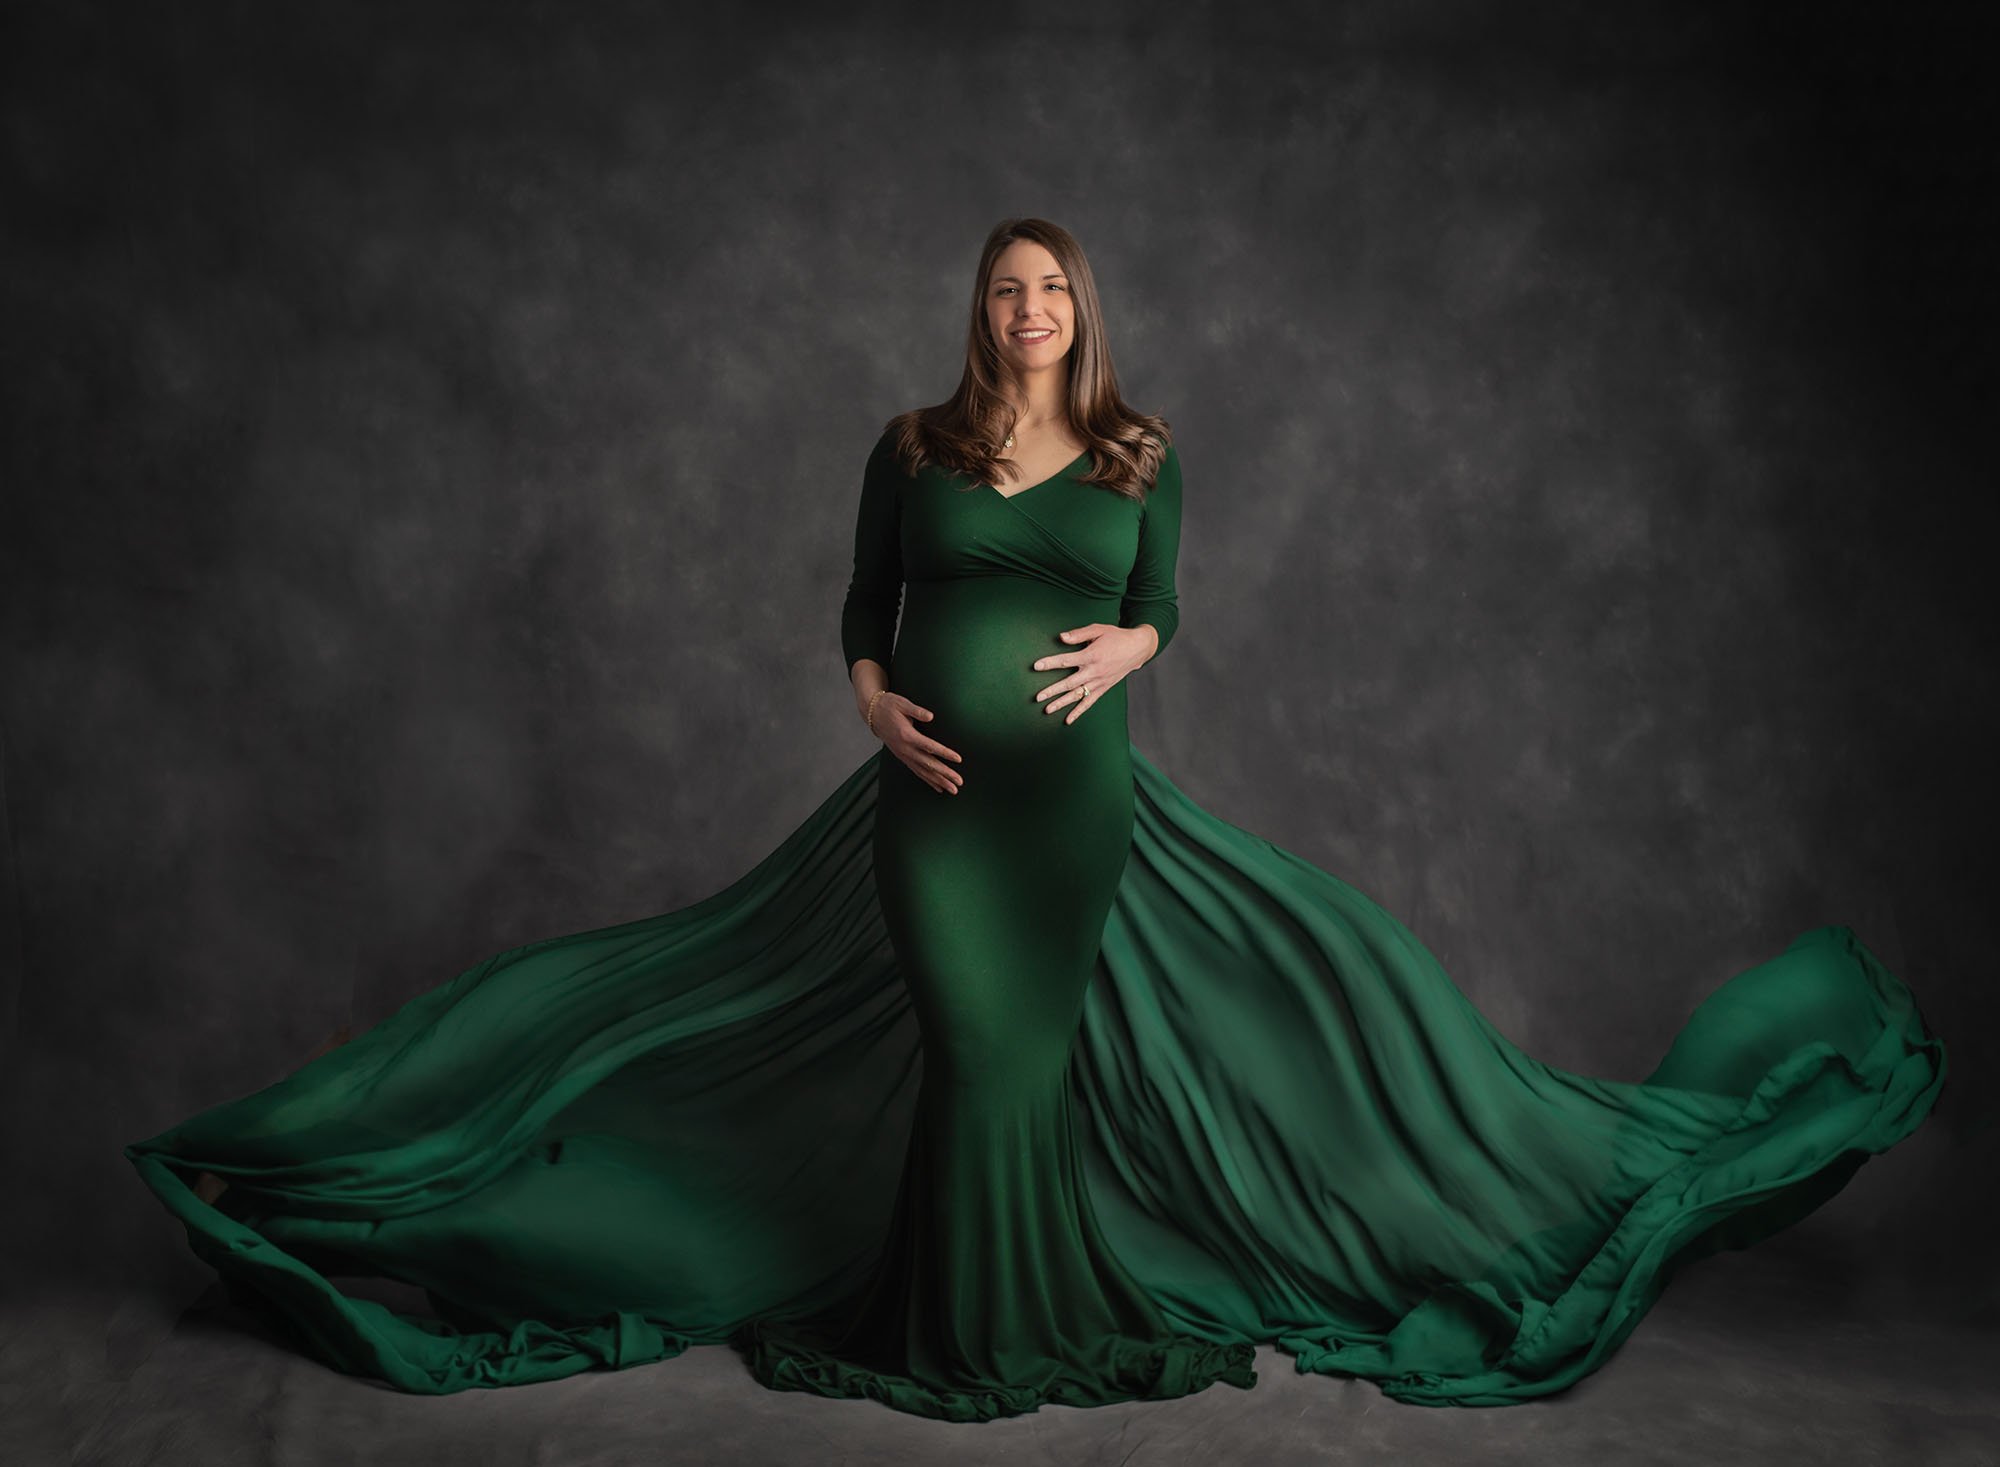 maternity photography rocky hill ct, professional pregnancy photos,
 pregnancy photoshoot,
maternity portraits rocky hill ct